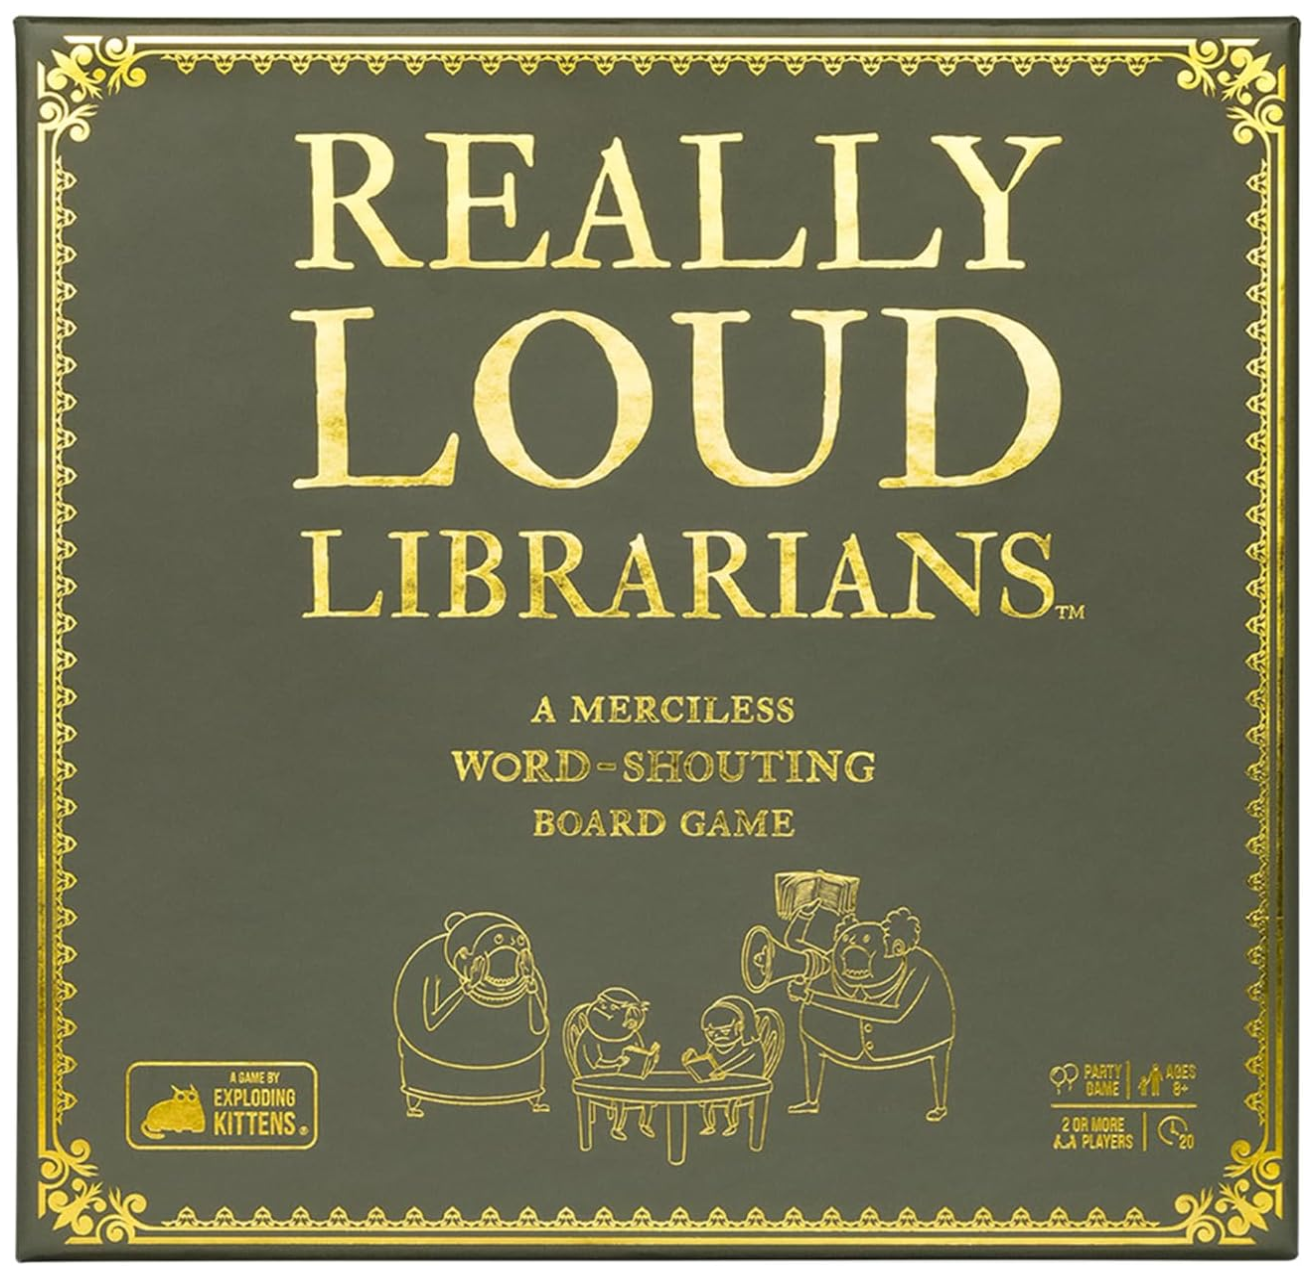 Really Loud Librarians